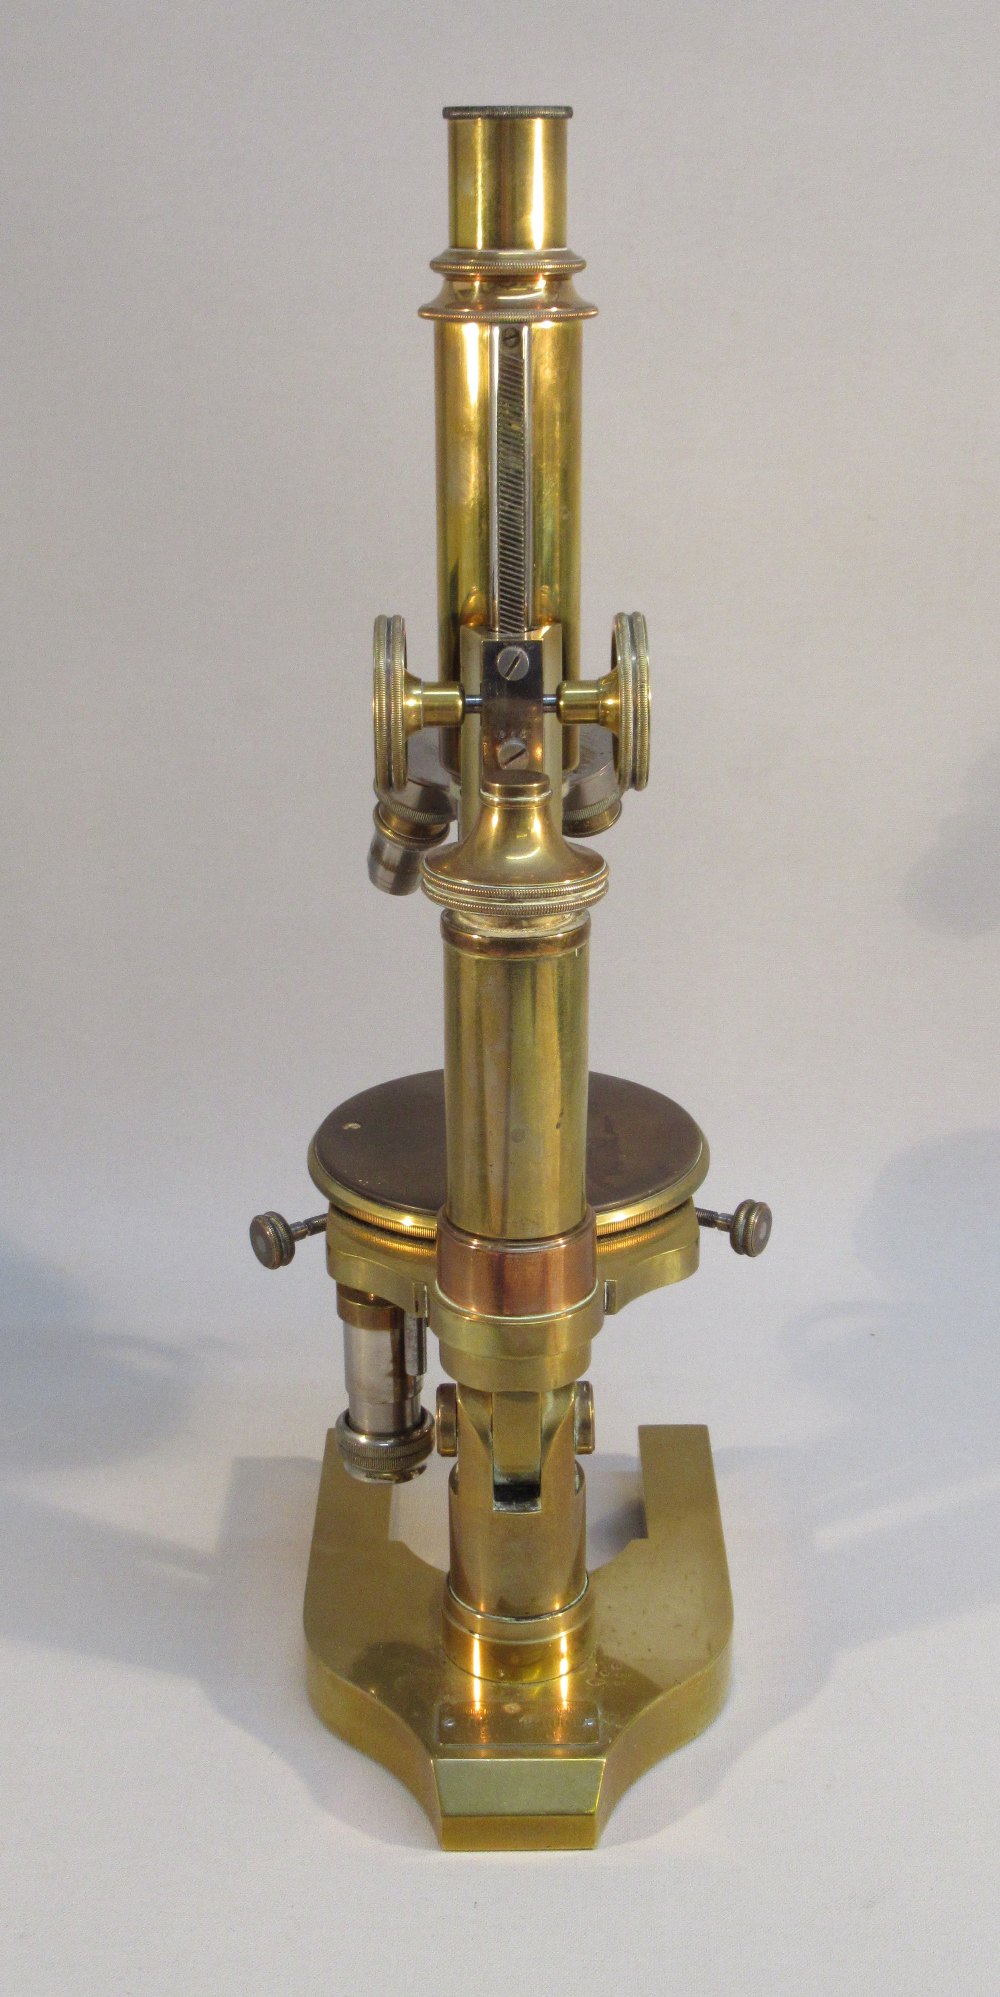 A LATE C19th BRASS MICROSCOPE BY OTTO HIMMLER. BERLIN N.14160 LACQUERED BRASS, HORSE SHOE FOOT, - Image 2 of 10